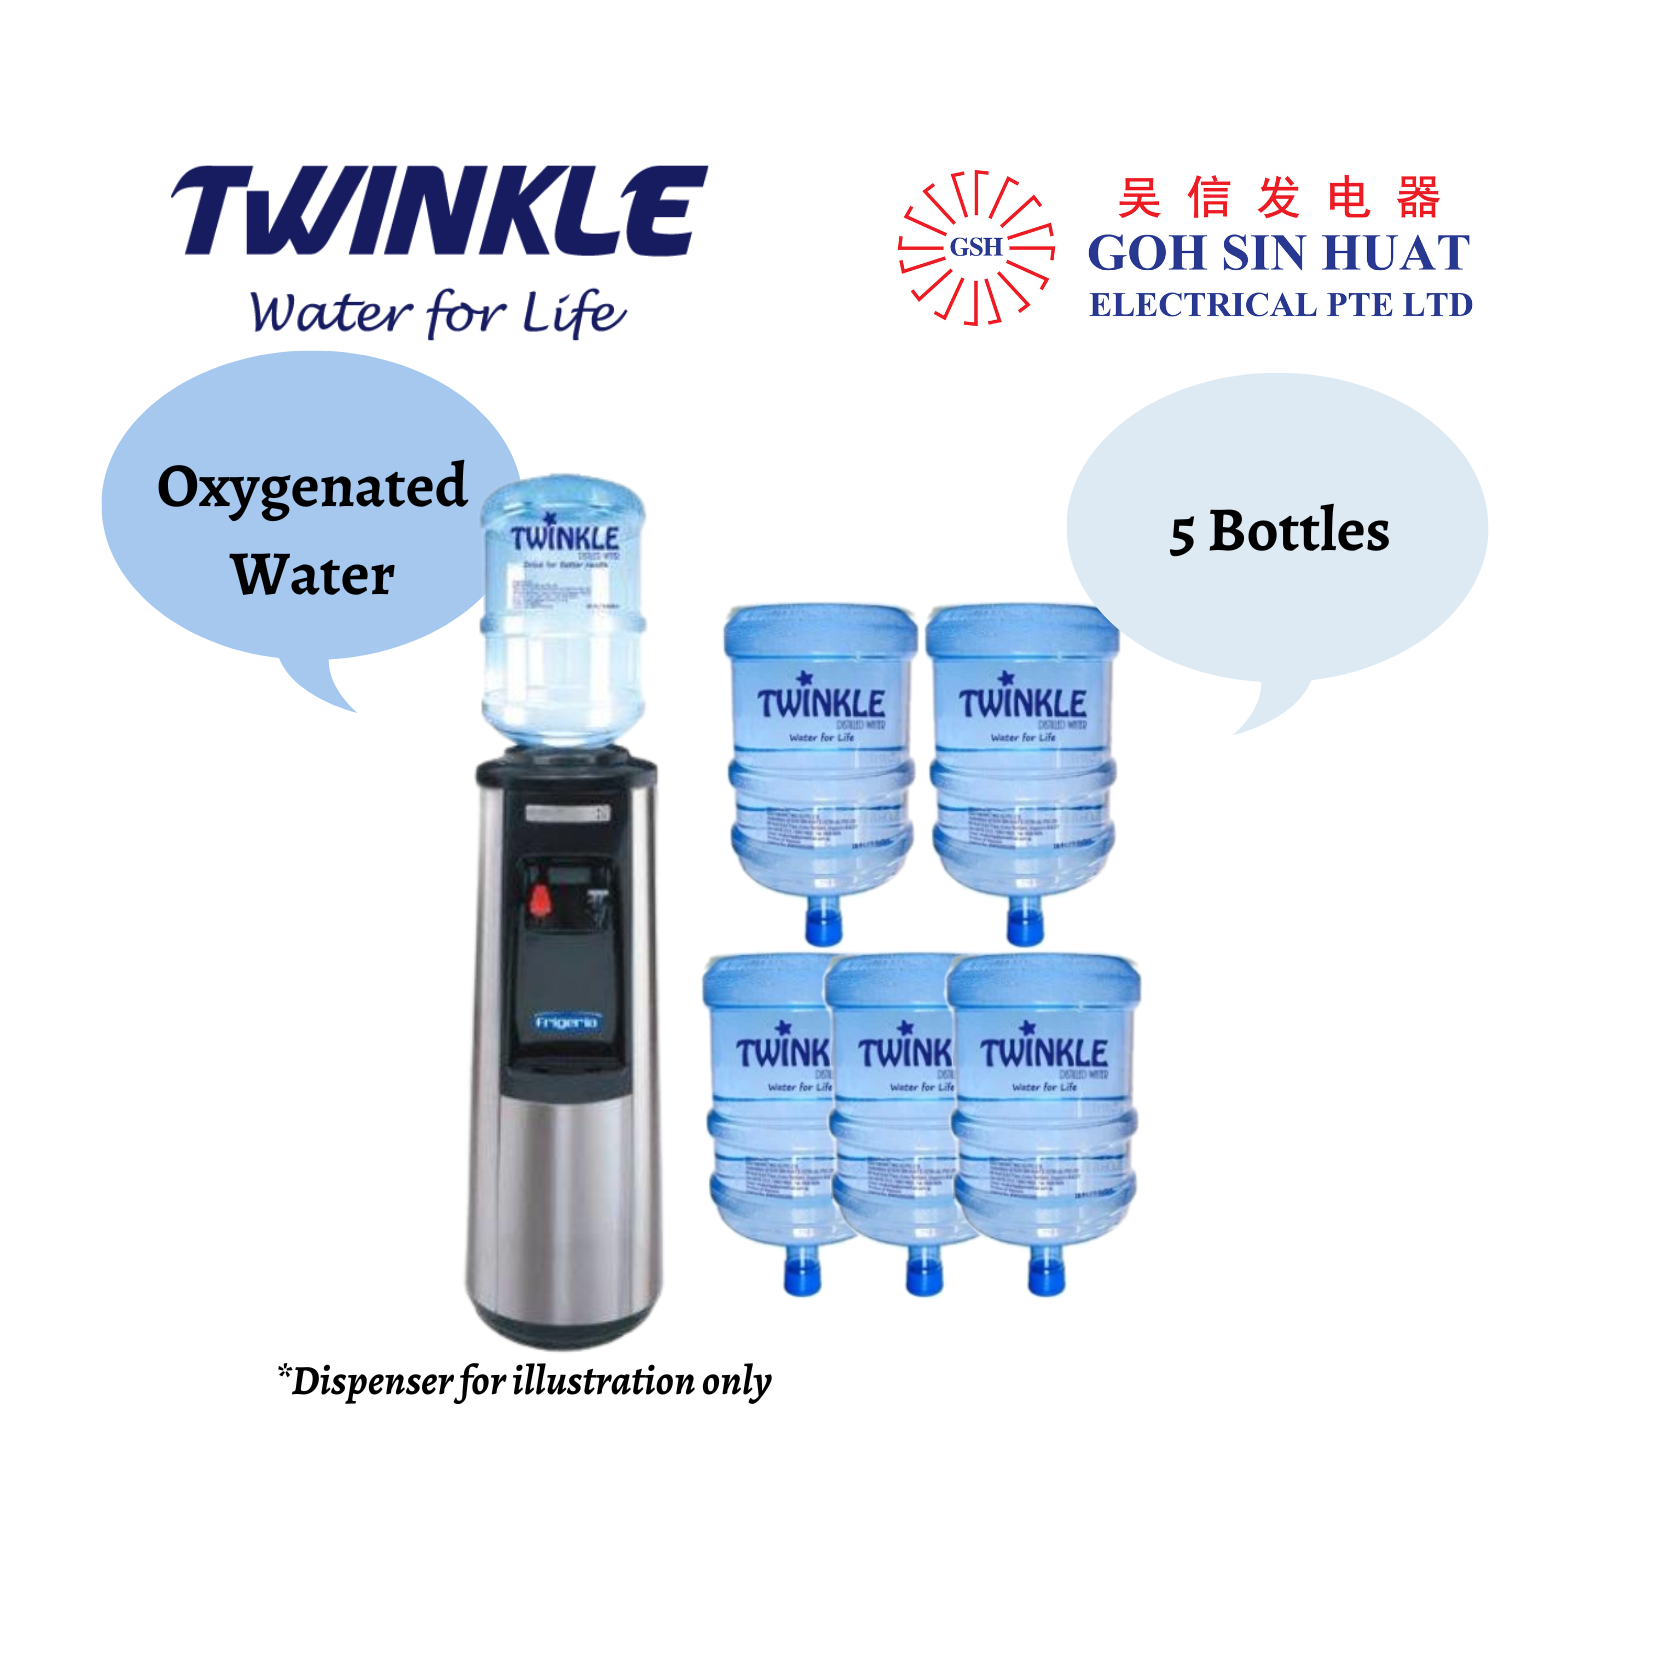 Twinkle 19L/ 5 Gallons Oxygenated Bottled Water *For Existing Customer